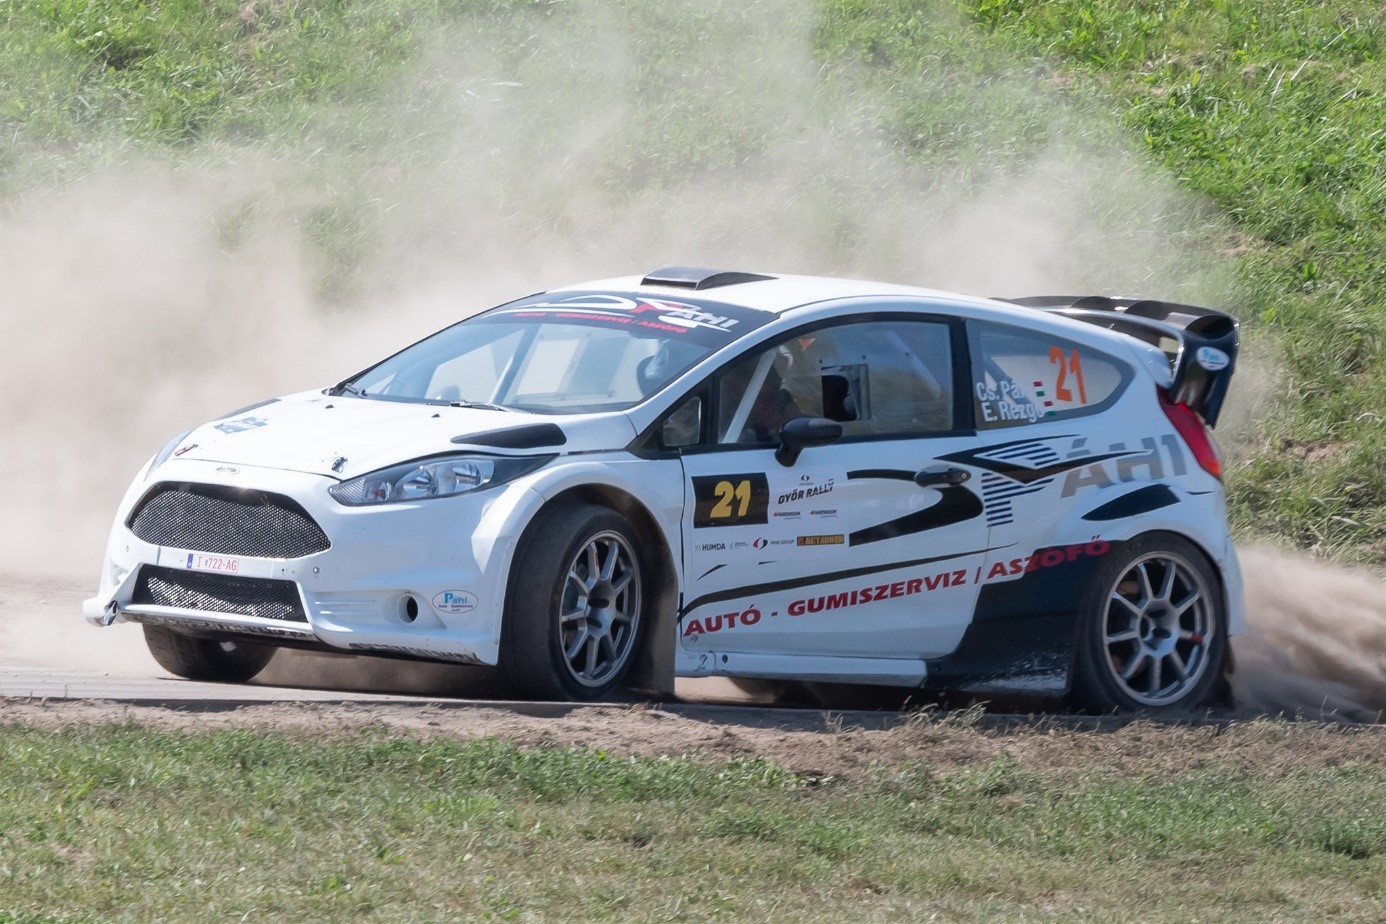 The spectacular stage of the WHB Győr Rally on the SZE campus attracted thousands of visitors